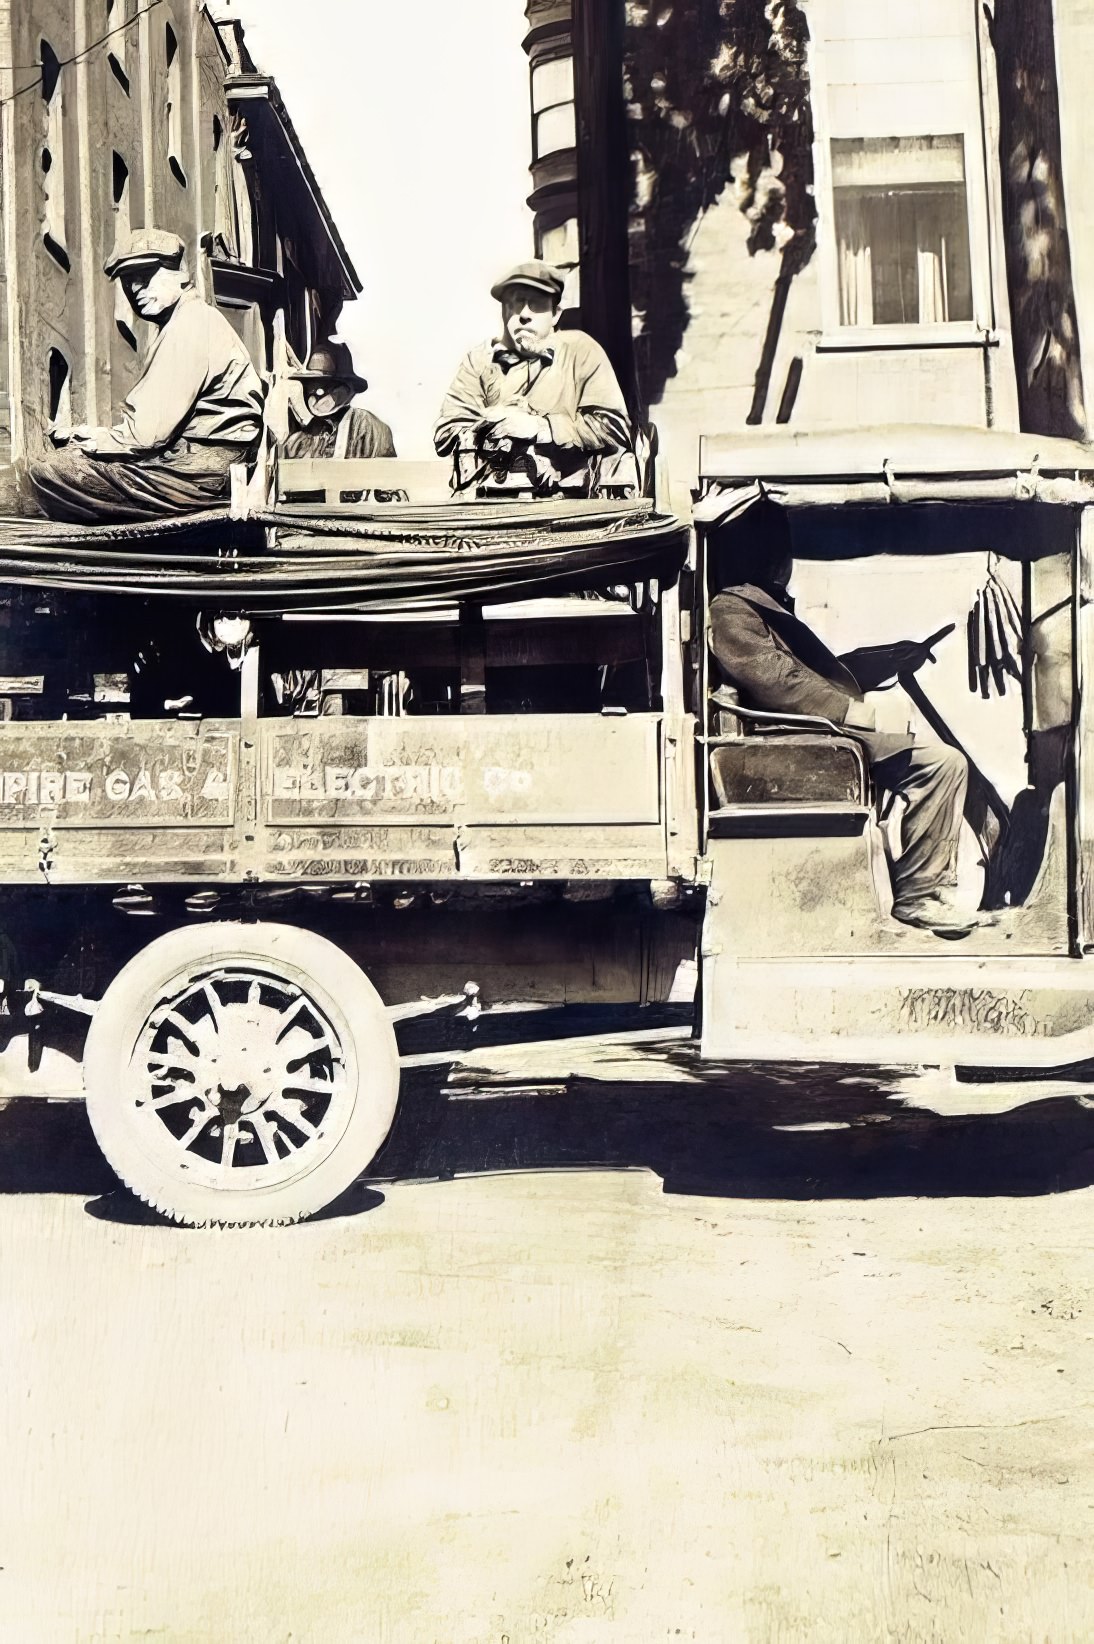 Thomas Welch, A. Fields, and C. McCoy on a company truck, Geneva, 1918